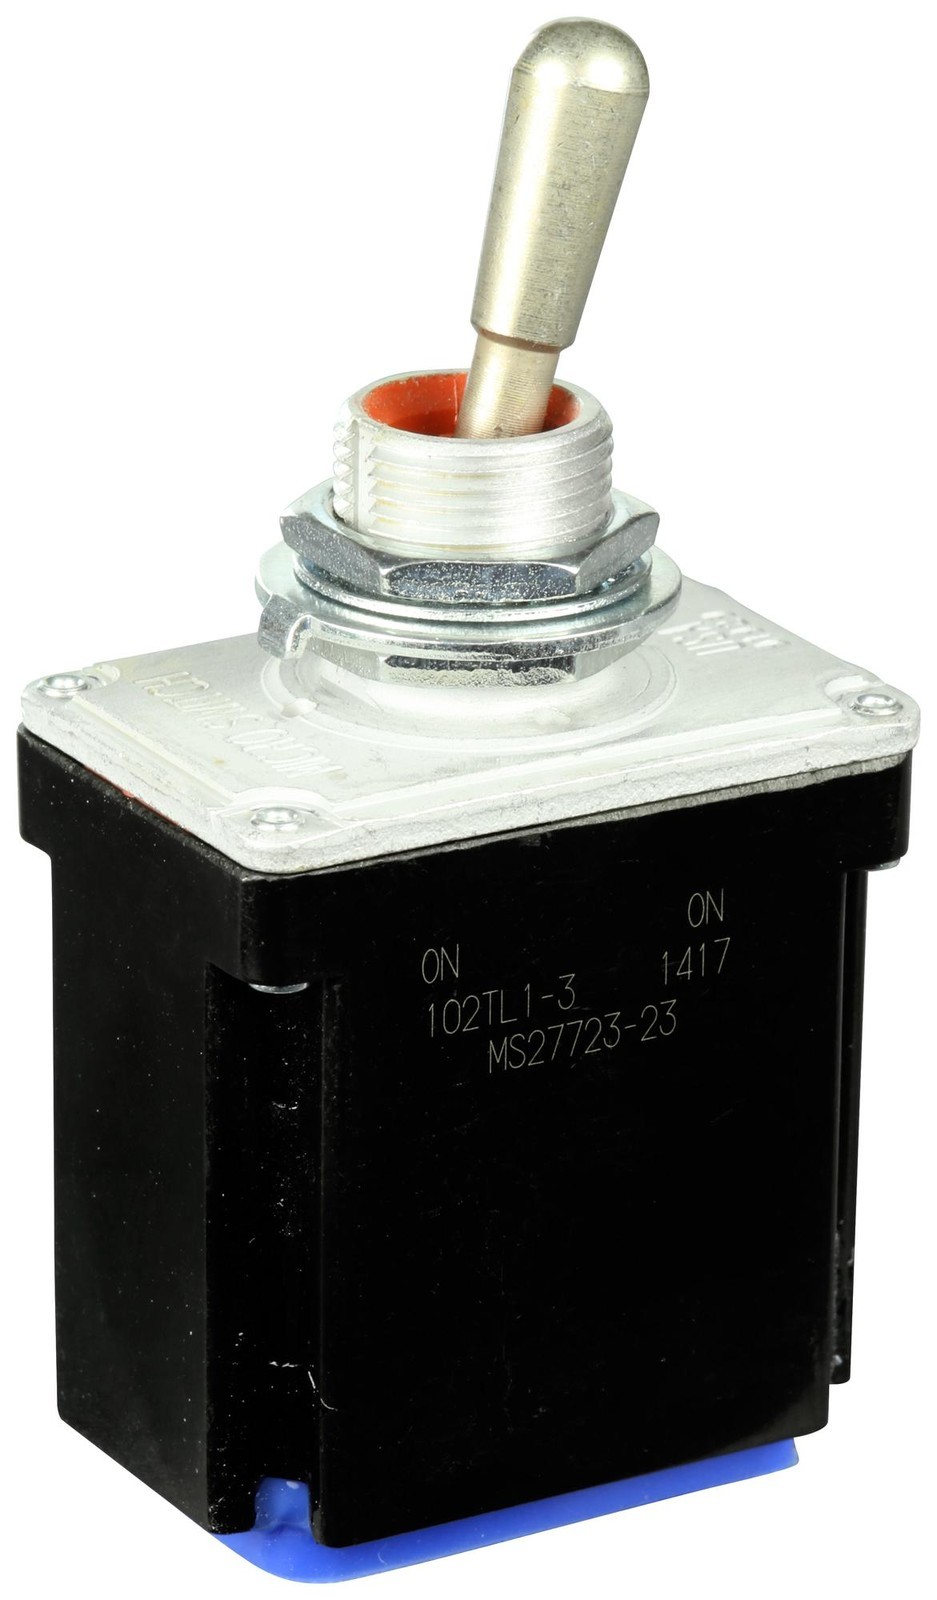 Honeywell 102Tl2-2 Toggle Switch, Dpst, 20A, 28Vdc, Panel